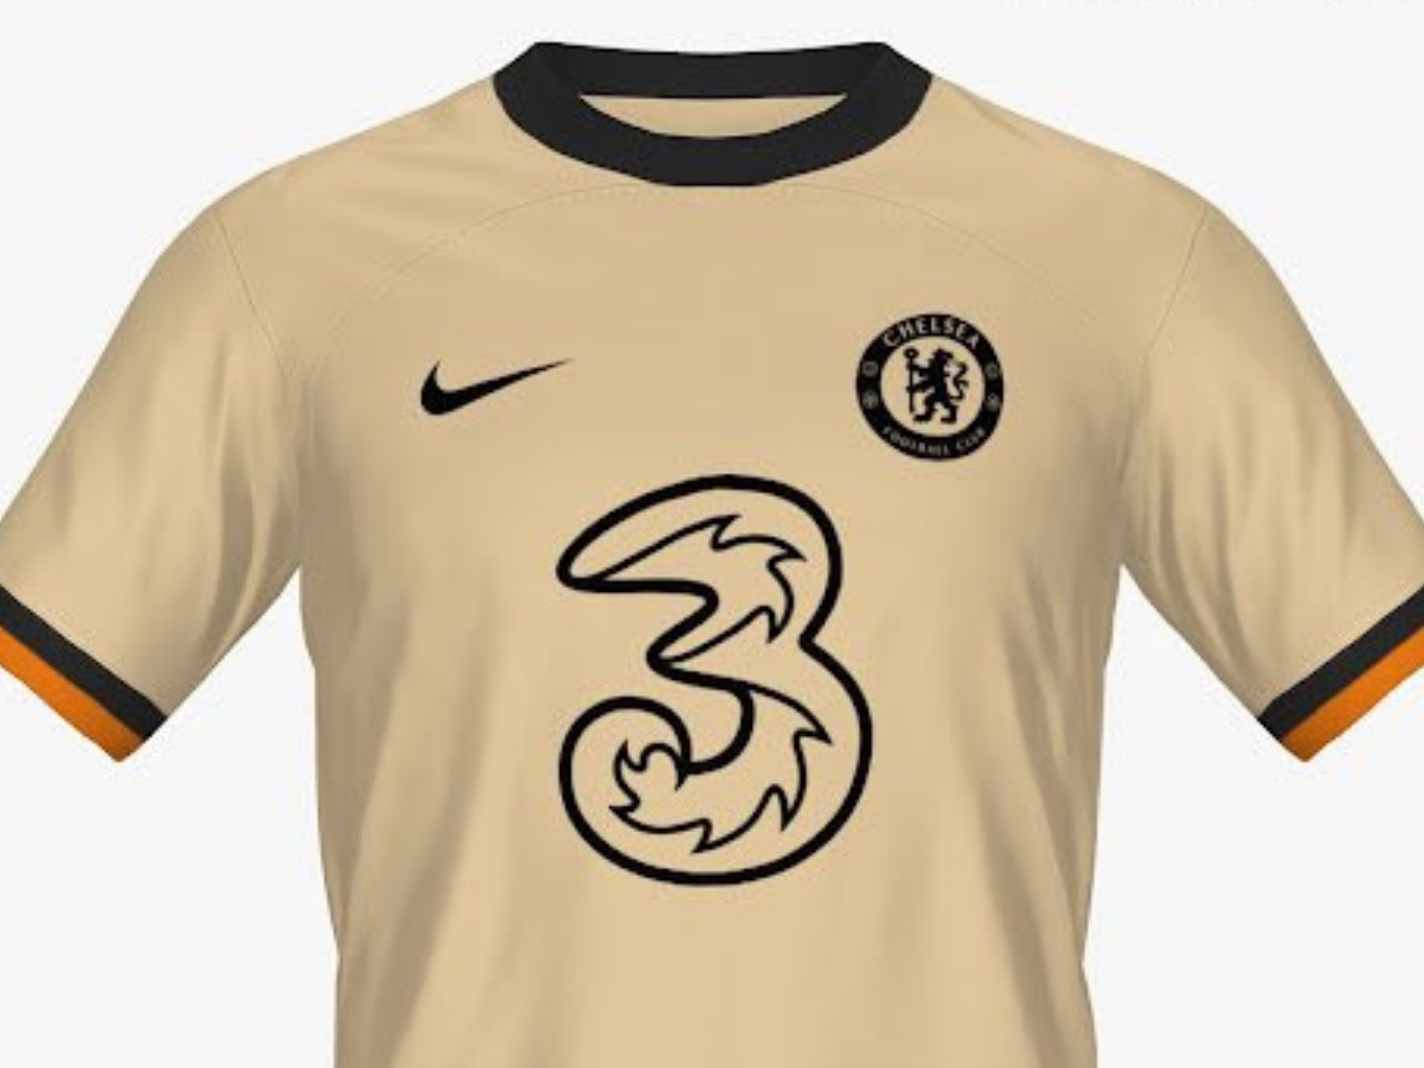 Leaked third kit for 22/23 season faces backlash after Chelsea fans spot Three UK logo